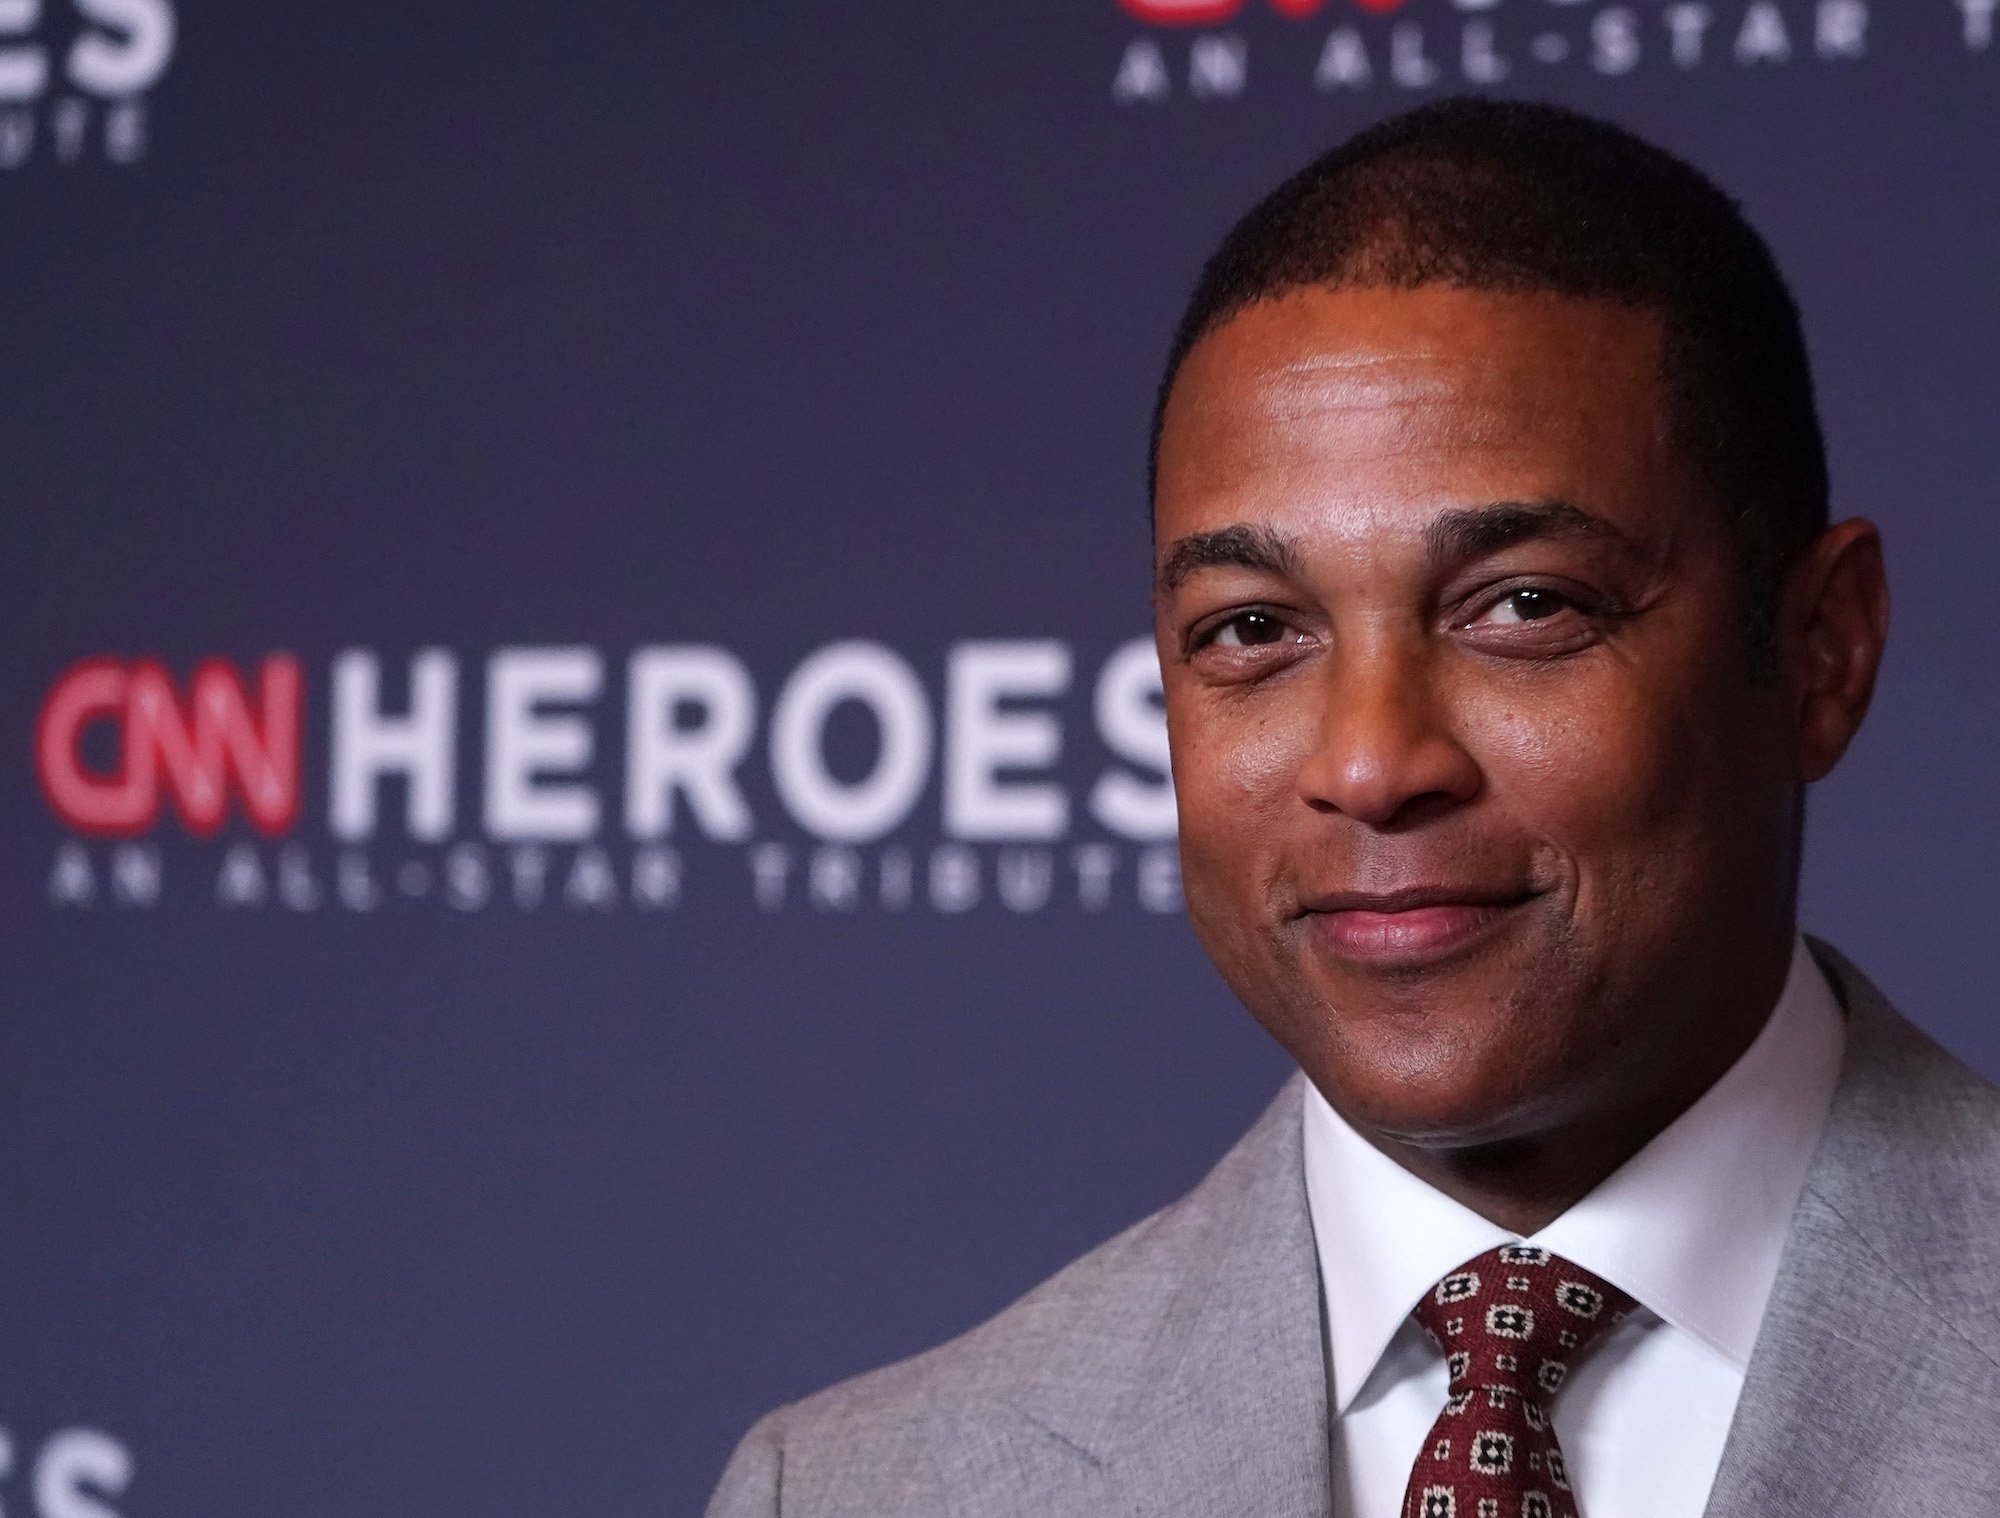 Don Lemon smiling in front of a blue background